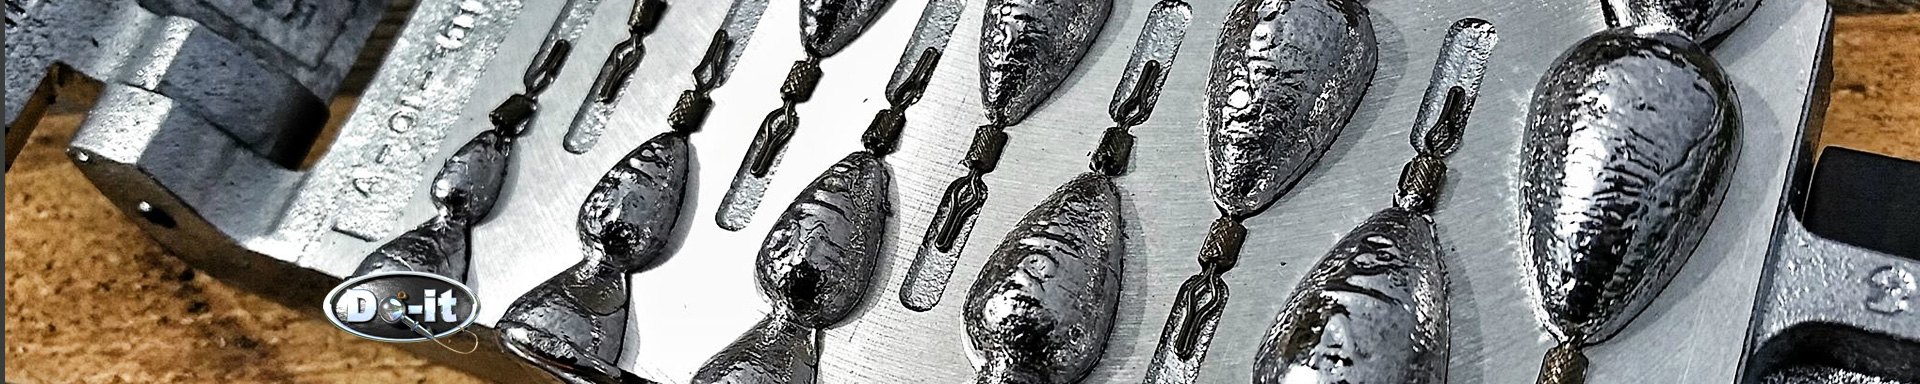 Do-It Molds Baits & Lures